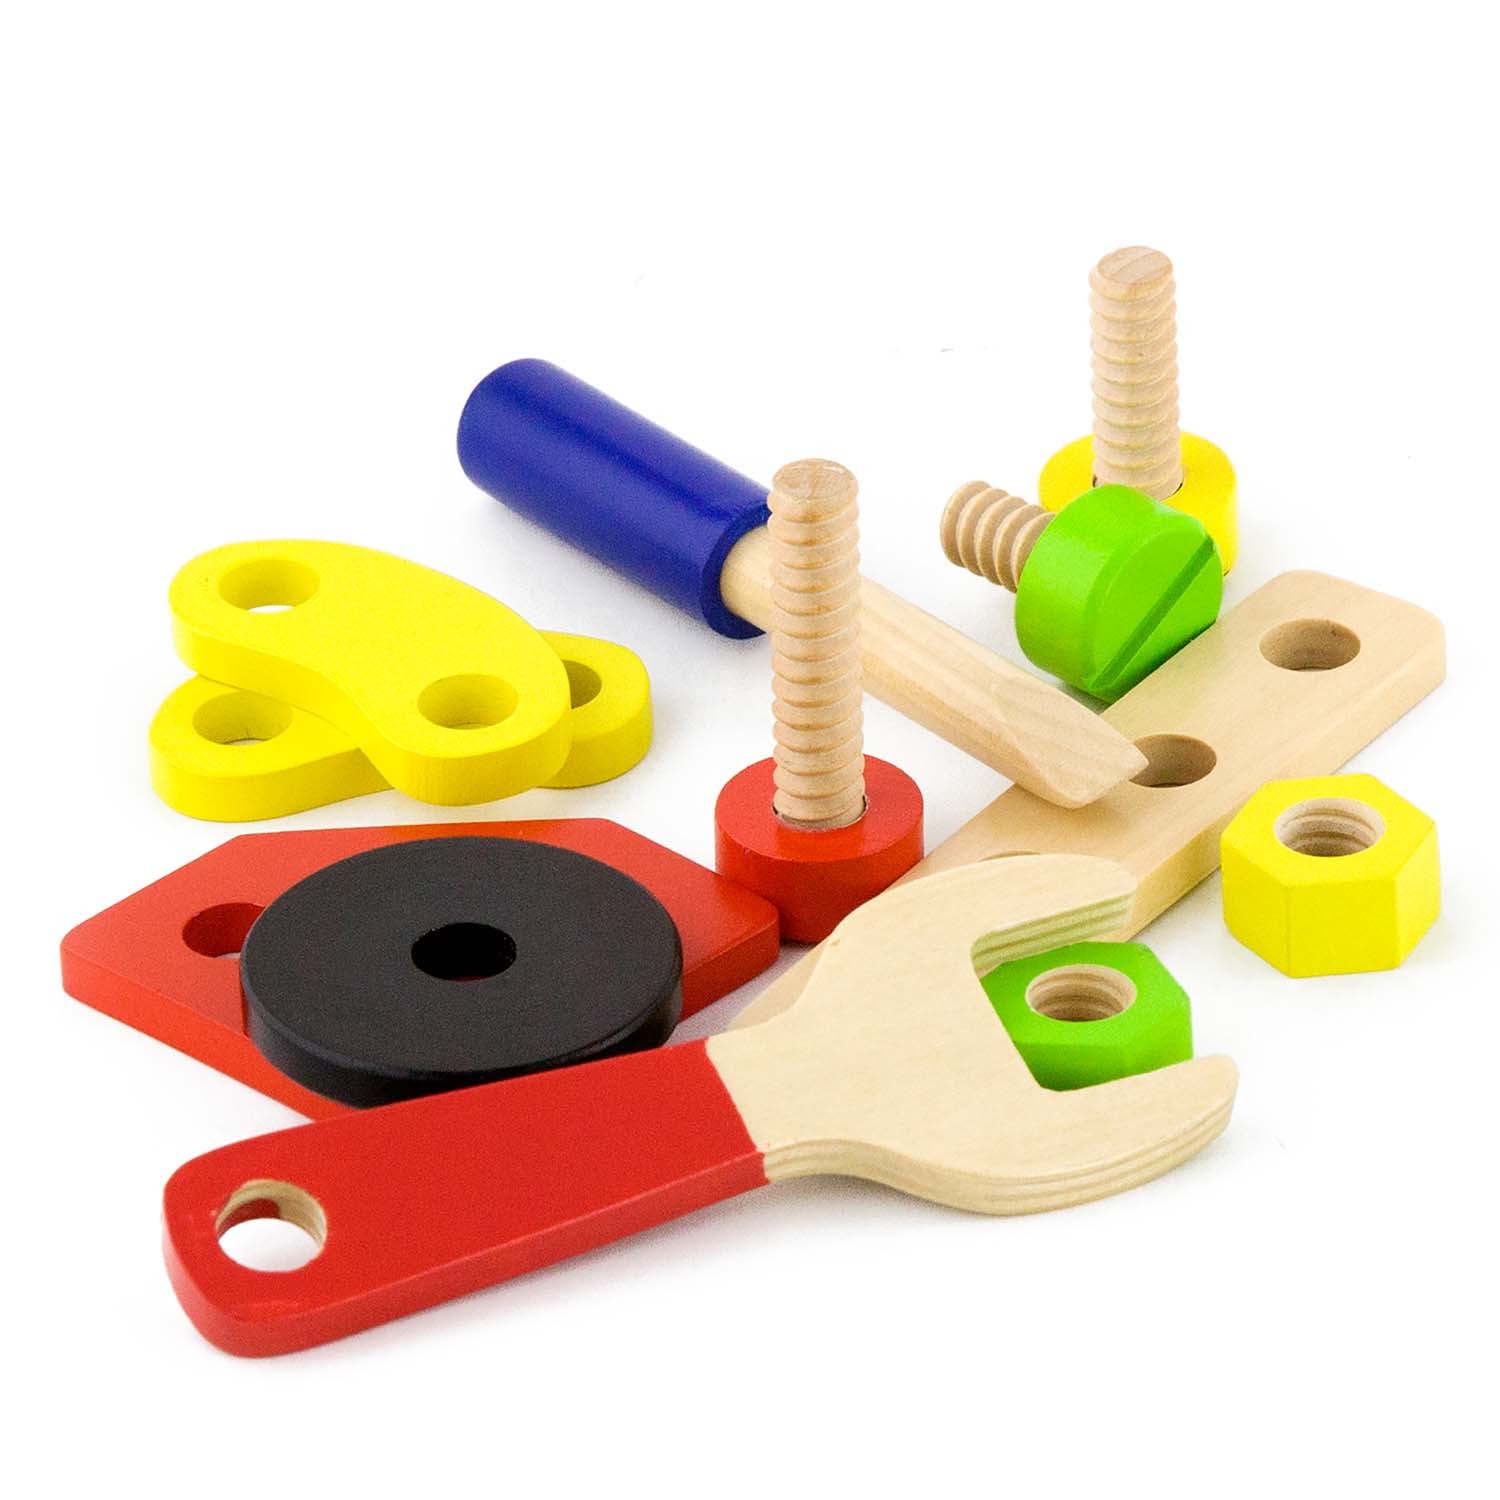 tools included in the construction blocks set